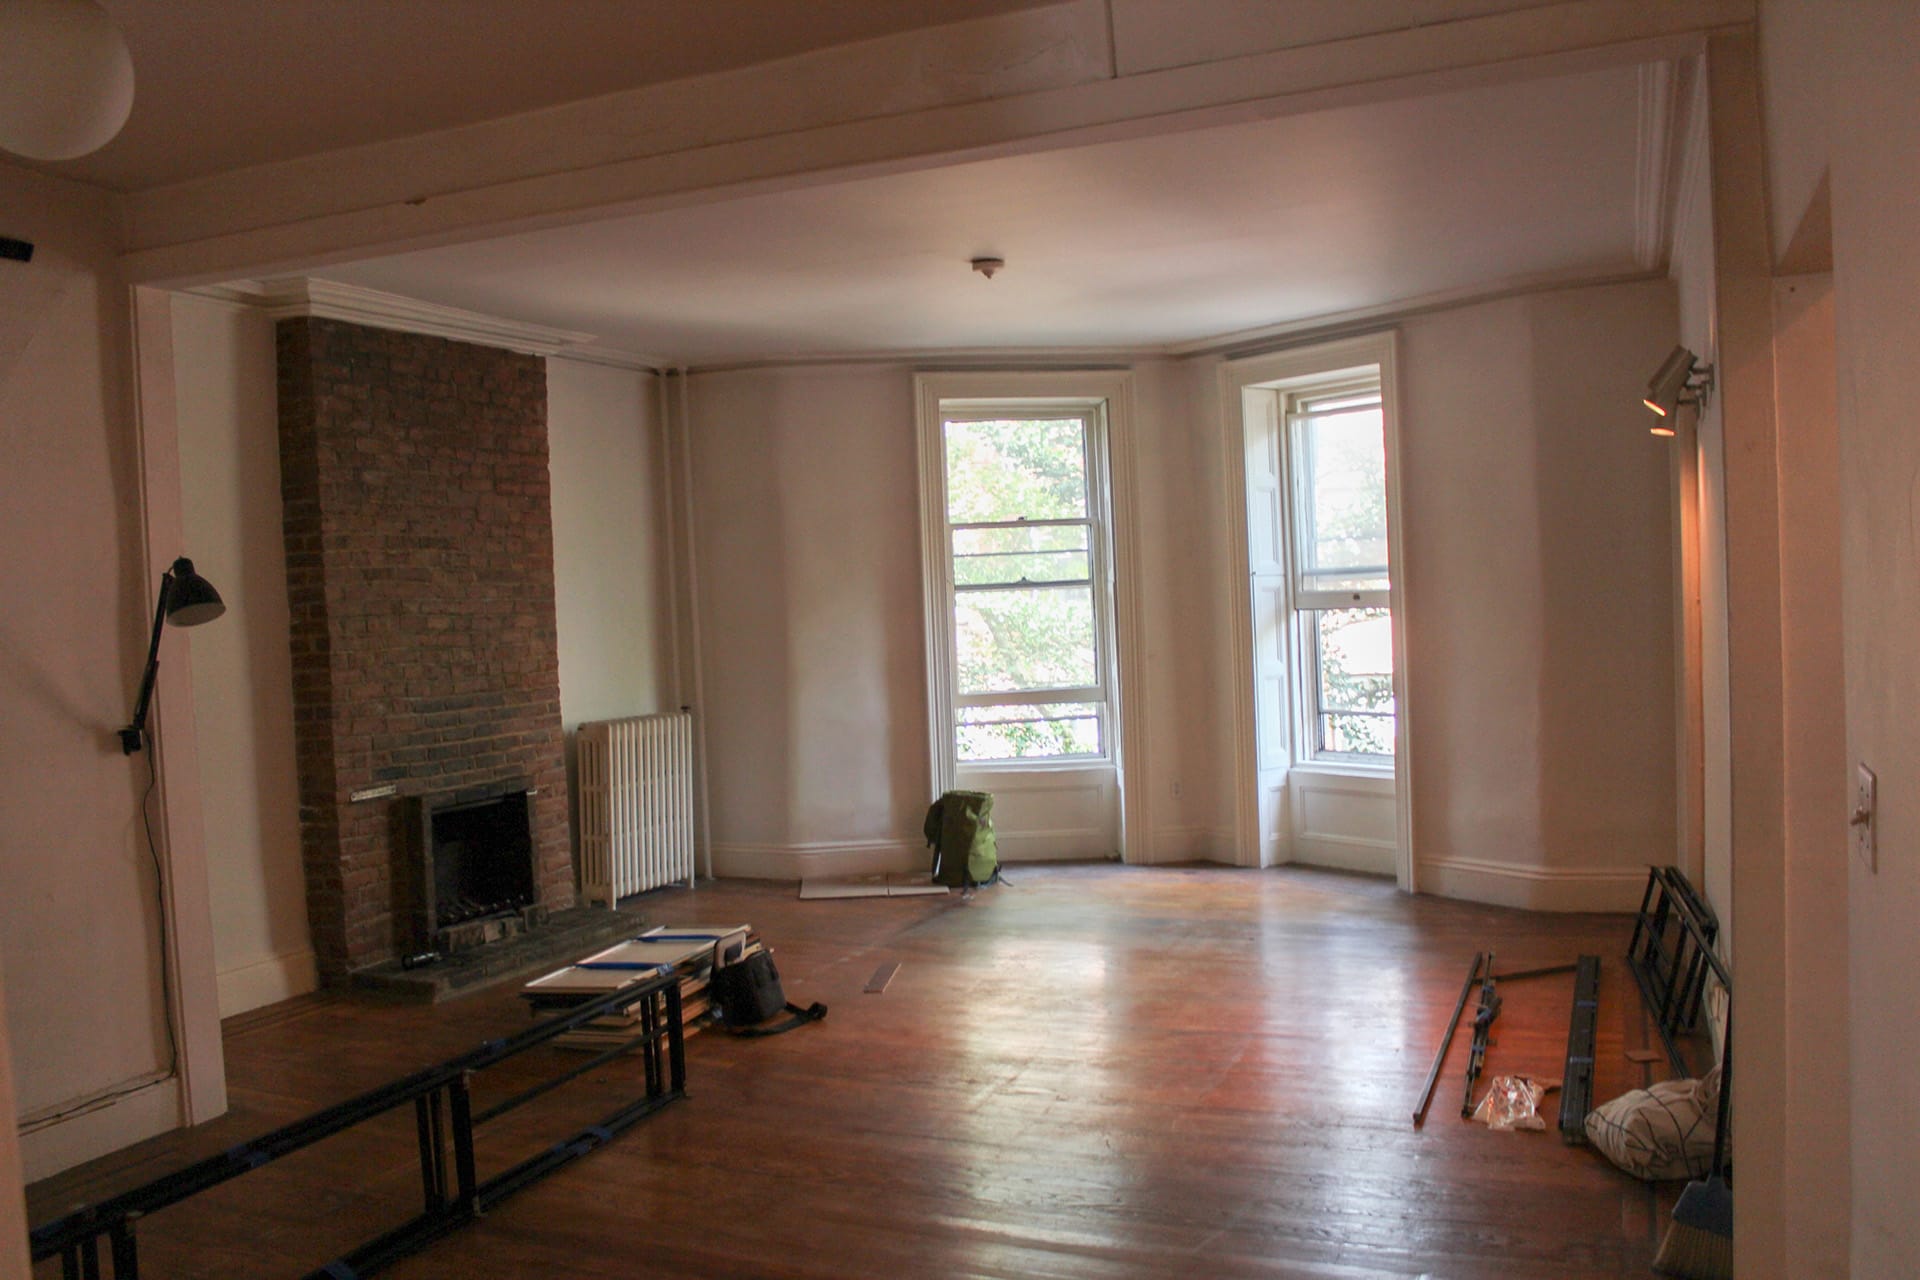 Living room at the front of a Brooklyn Heights apartment before our renovation